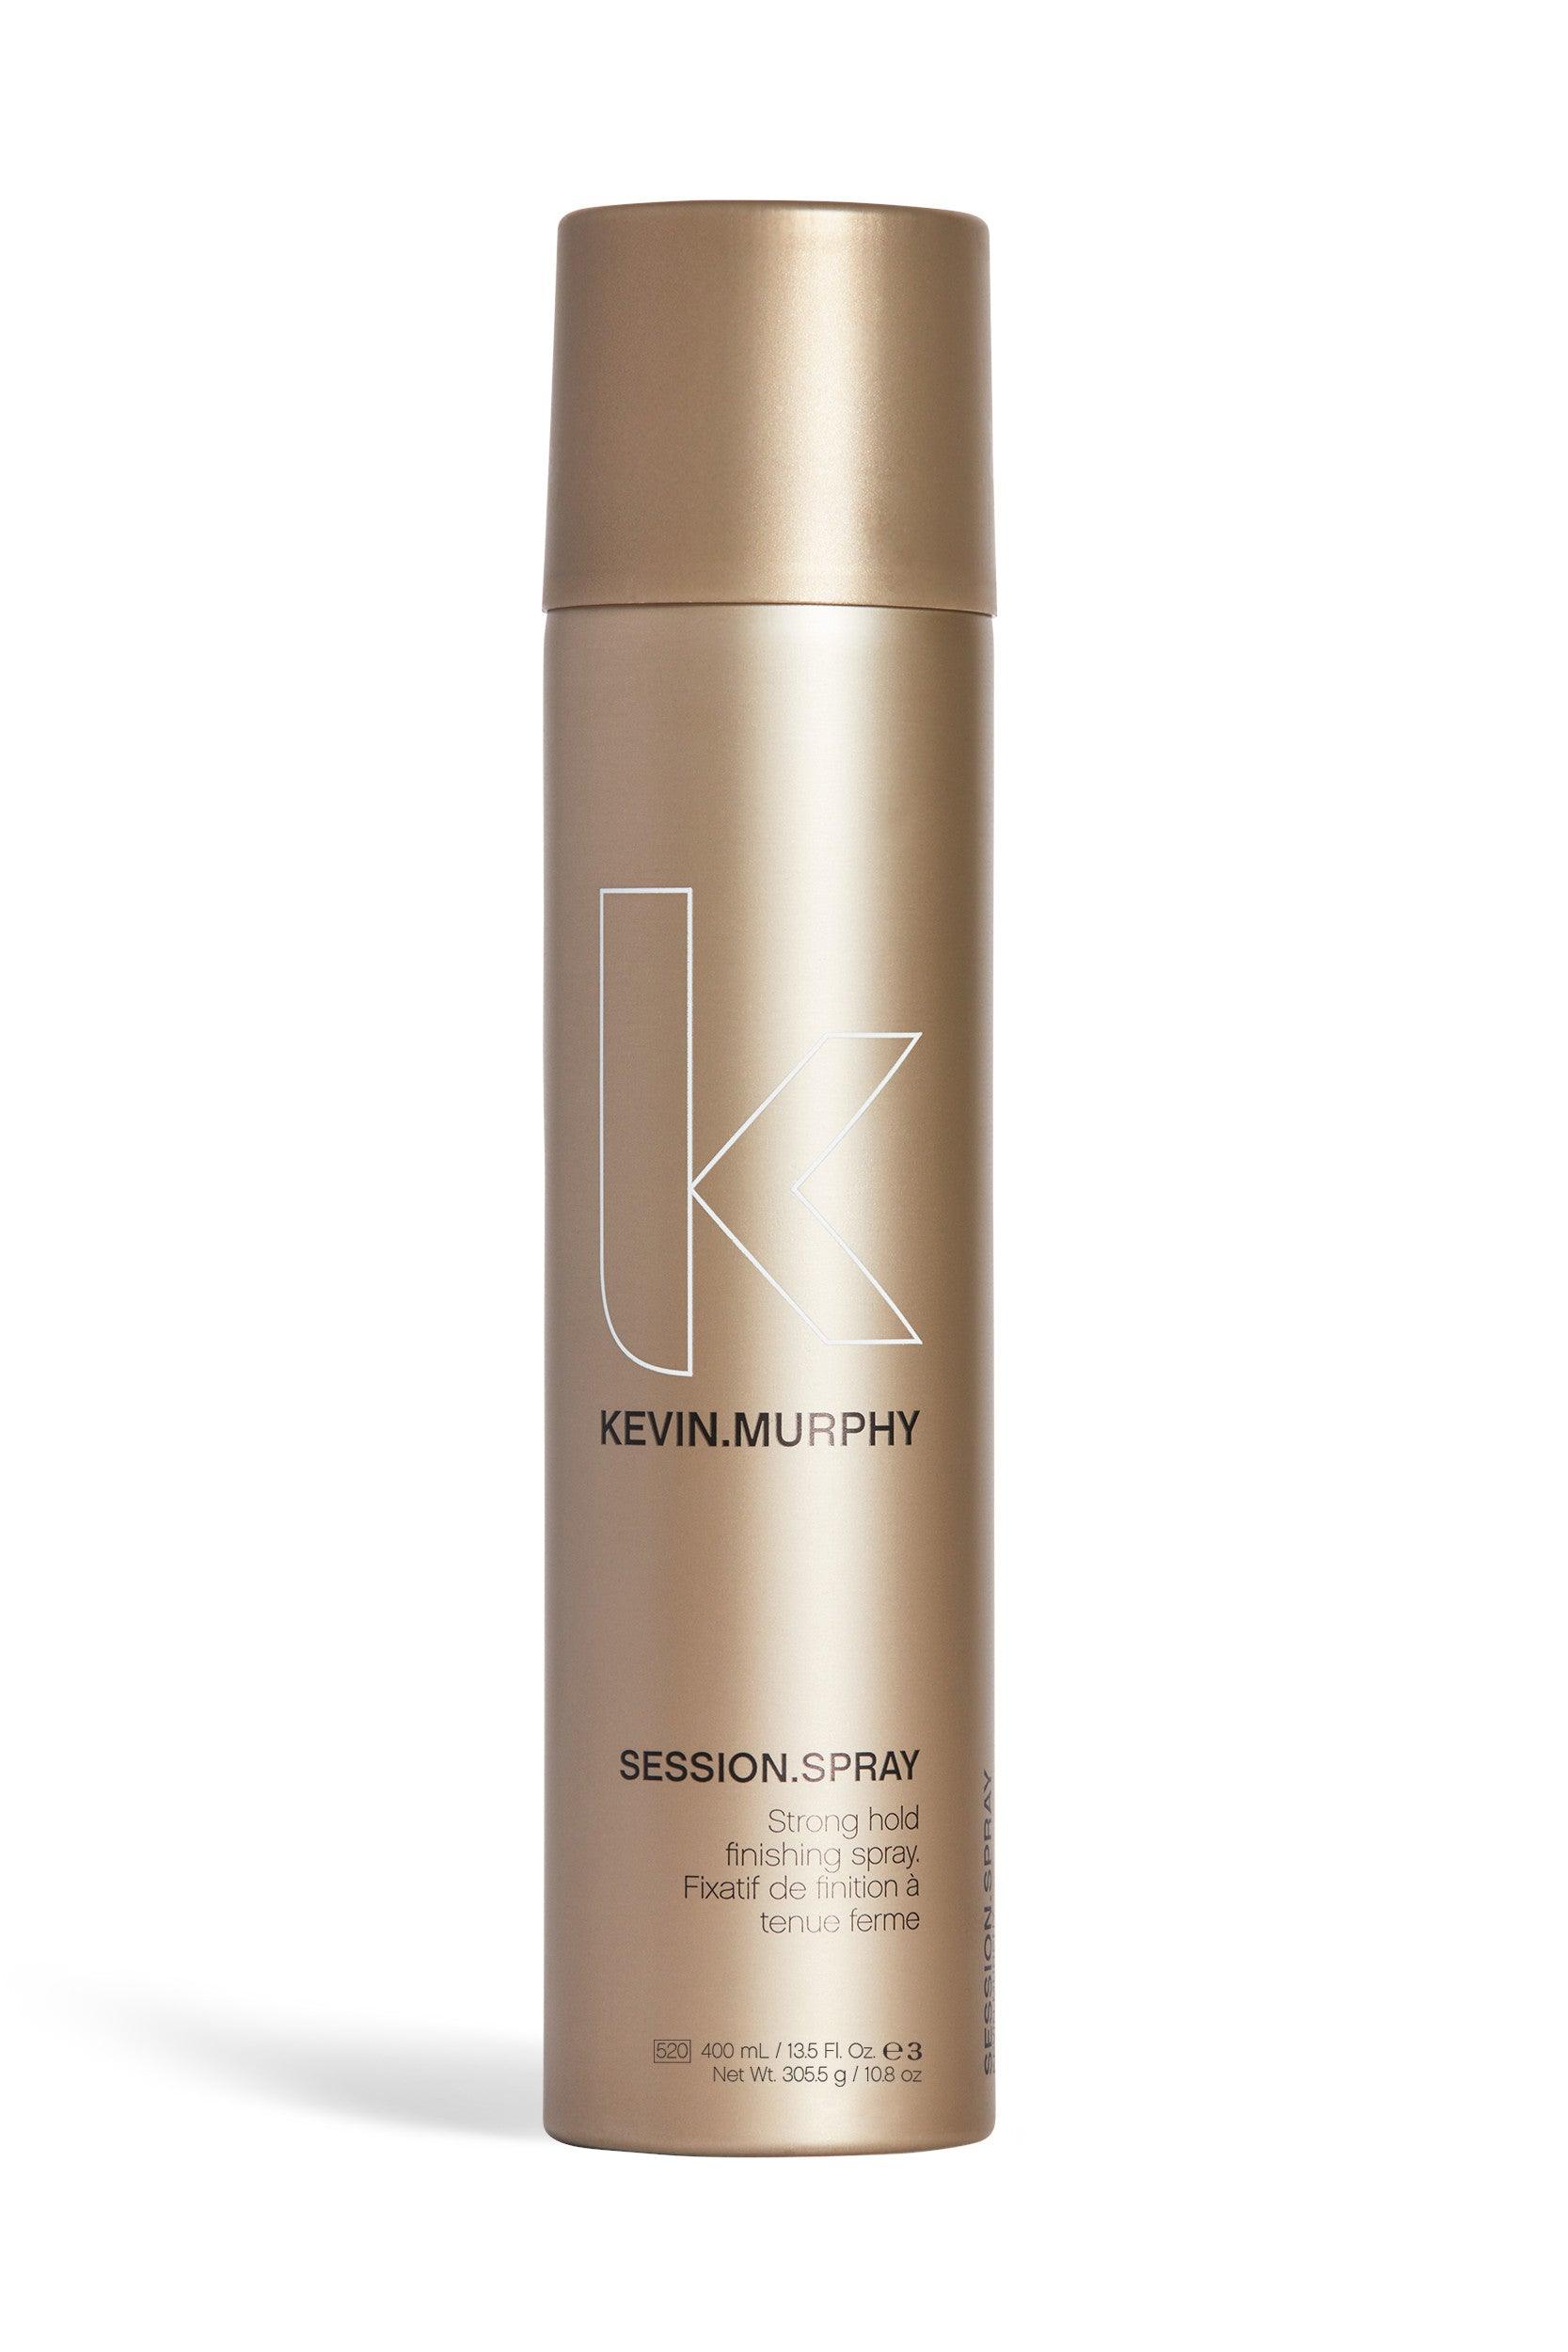 SESSION.SPRAY Kevin Murphy